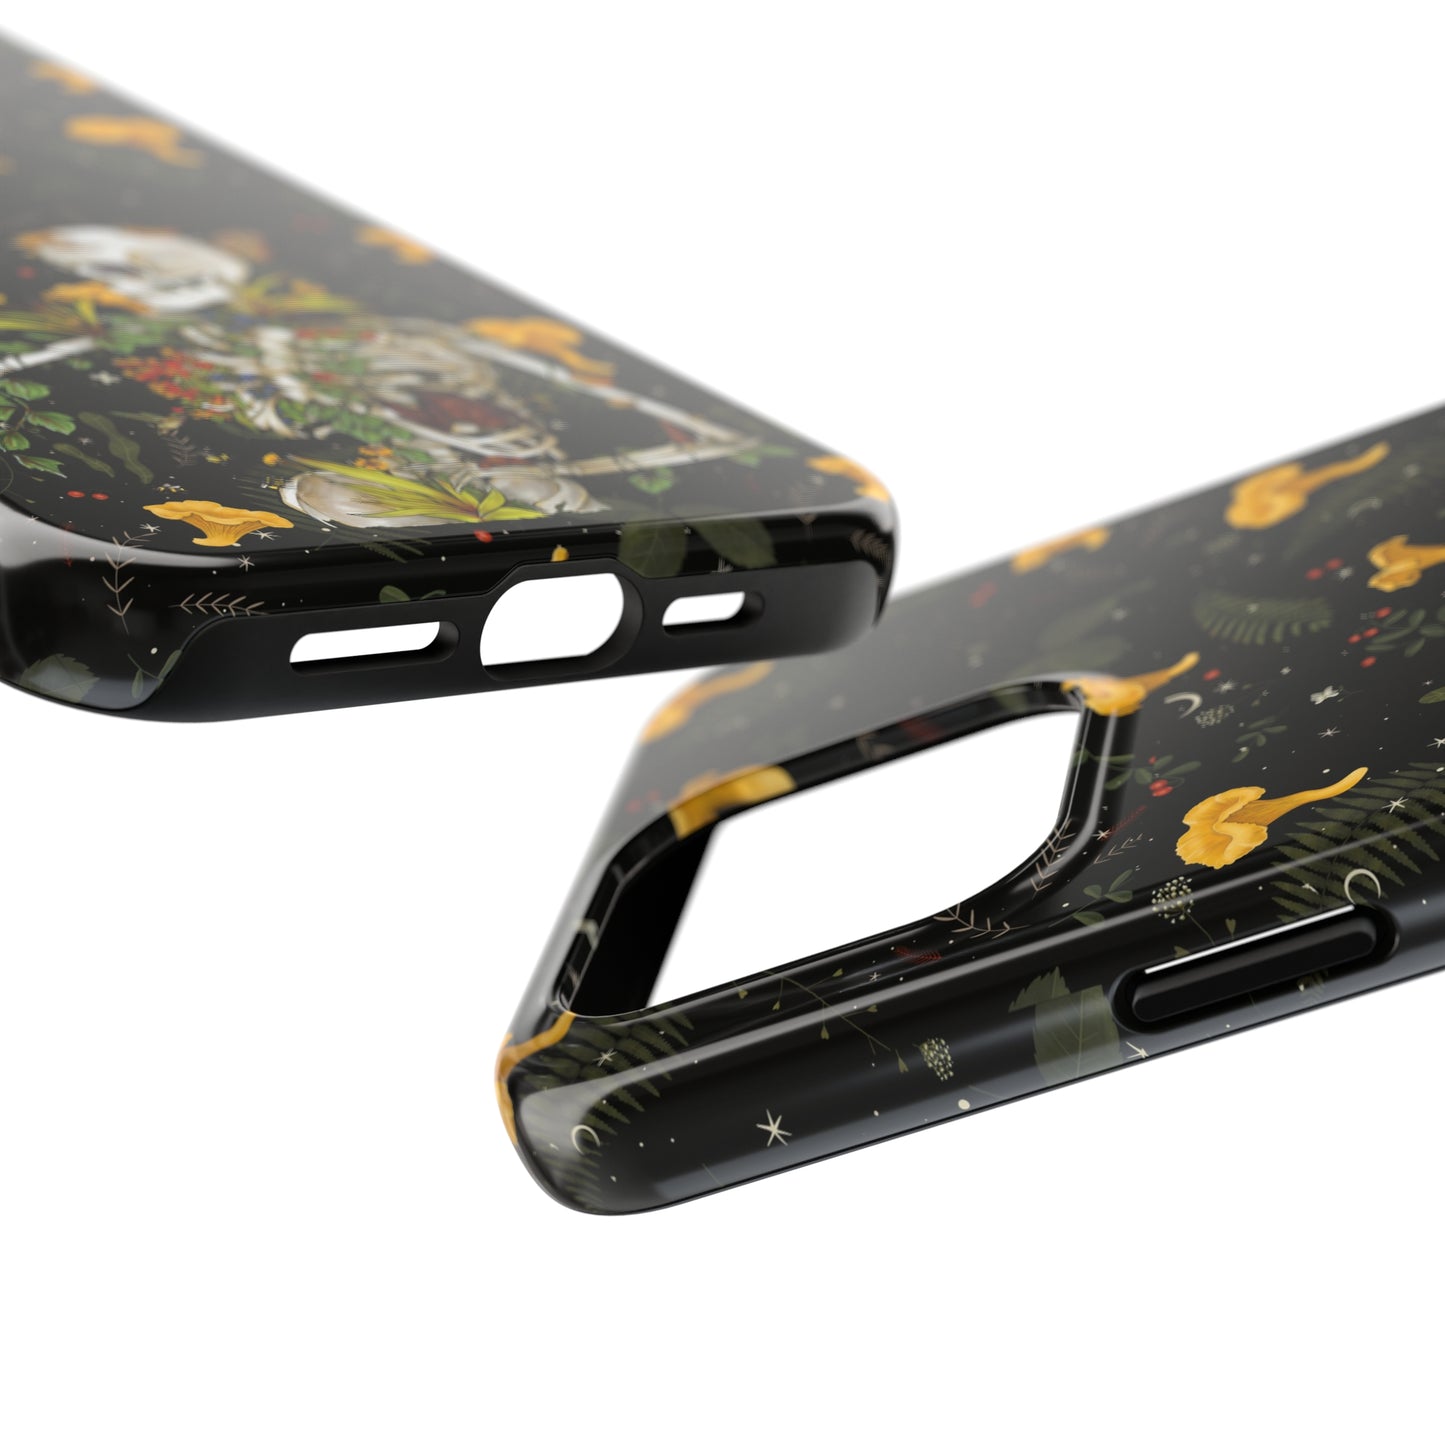 Mushrooms, skeleton and plants Tough Phone be Cases, Case-Matefor iPhone 15, iPhone 14, iPhone 13, iPhone 12 and iPhone 11